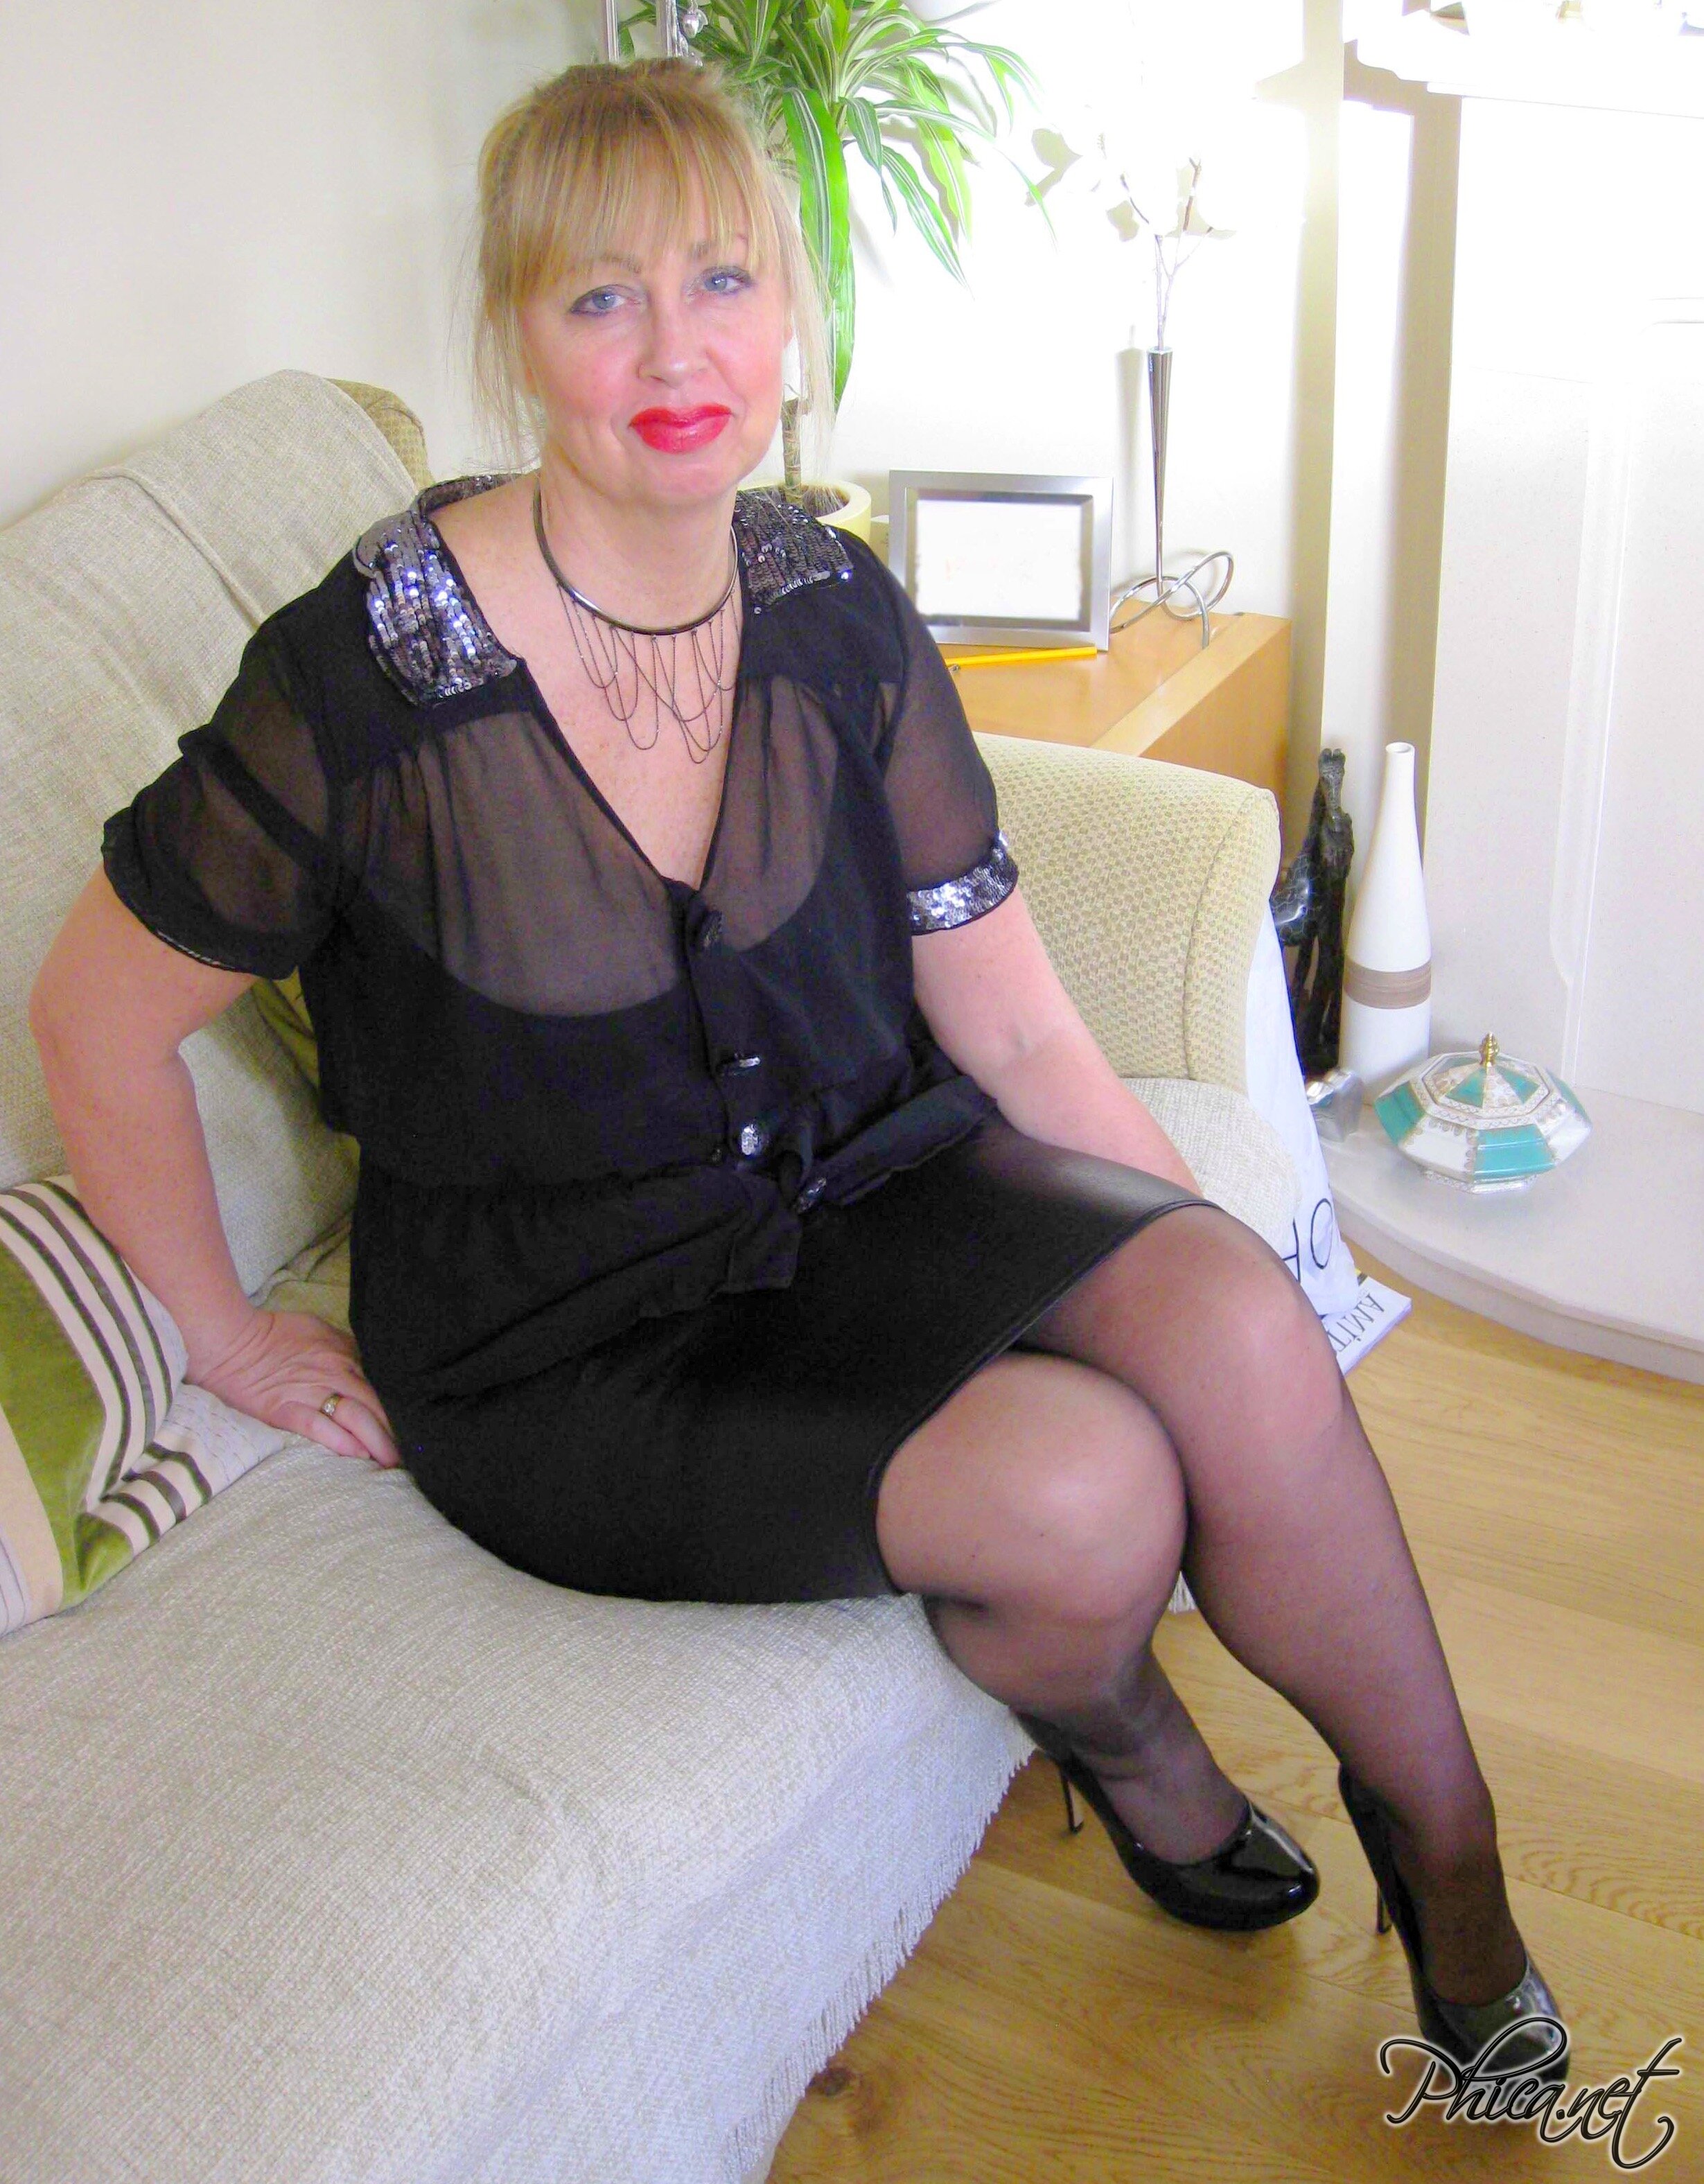 Slutwife wearing a Tight Shiny knee length skirt with a suspender belt and Shiny Nylon Stockings and High Heels